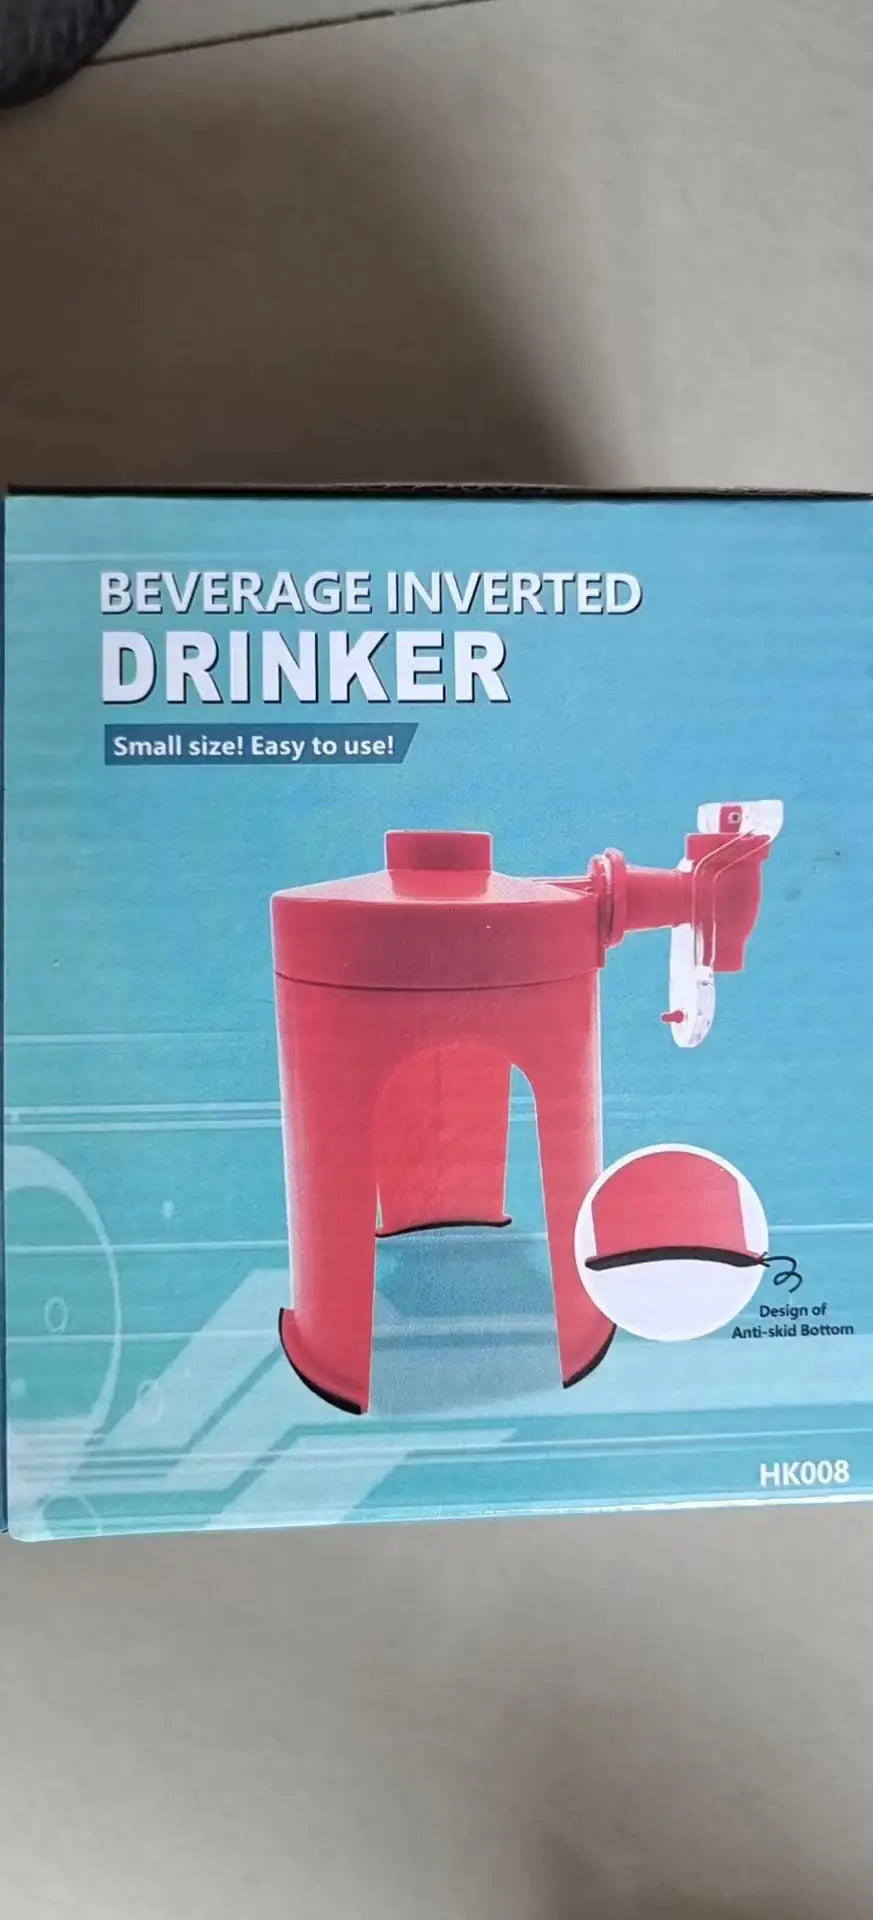 Upside Down Automatic Beverage Dispenser - A Novelty Drink Pouring Gadget for Home and Parties